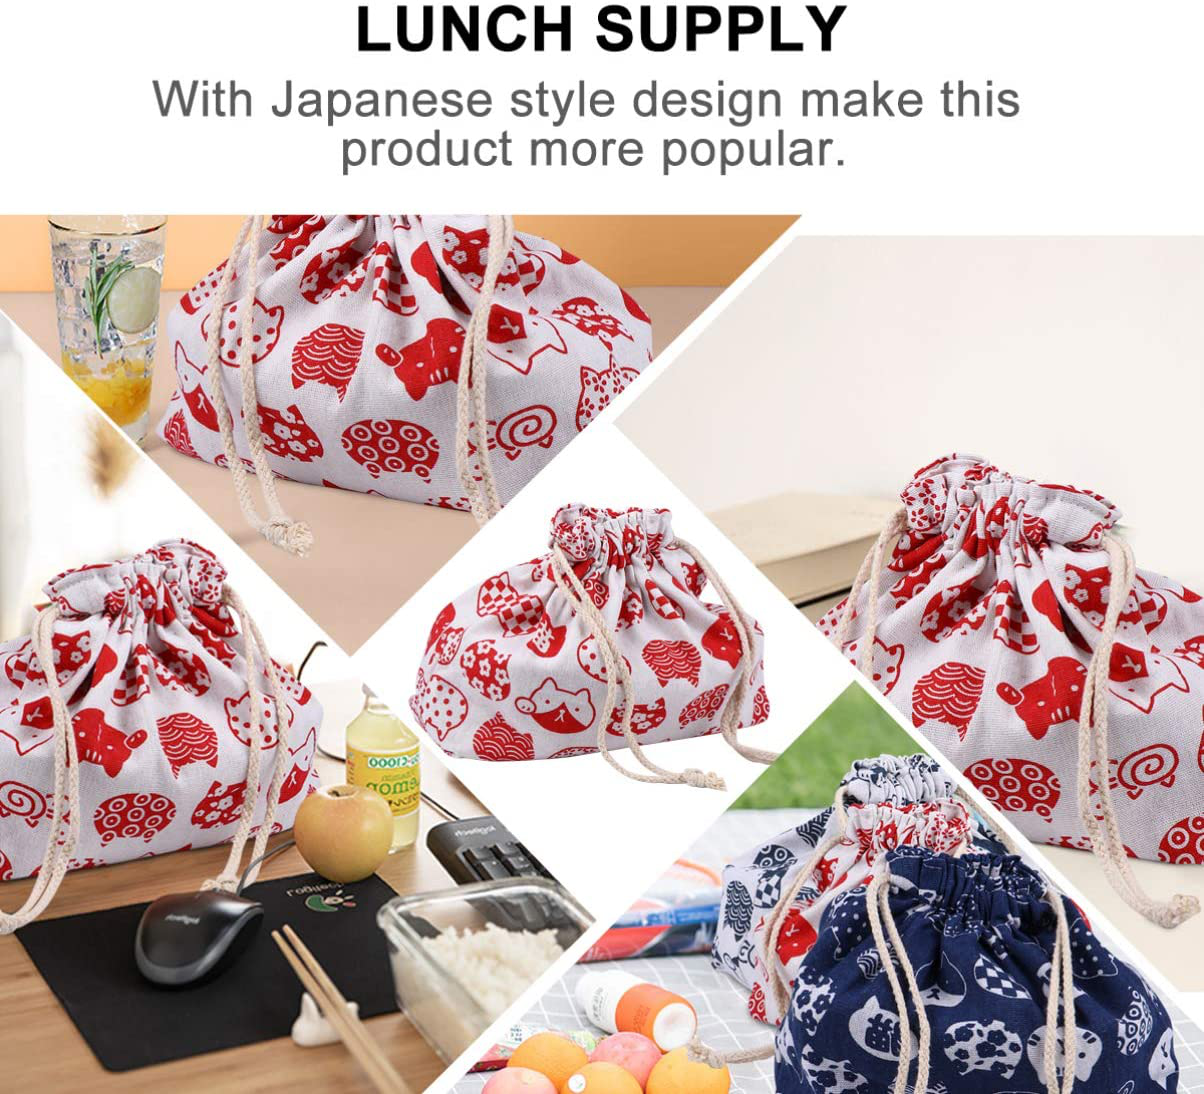 Toyvian Japanese Style Lunch Tote Bag Double Layers Cotton Linen Lunch Pouch Burlap Drawstring Storage Bag Box for Outdoor Activities Travel Business Office School Lunches White